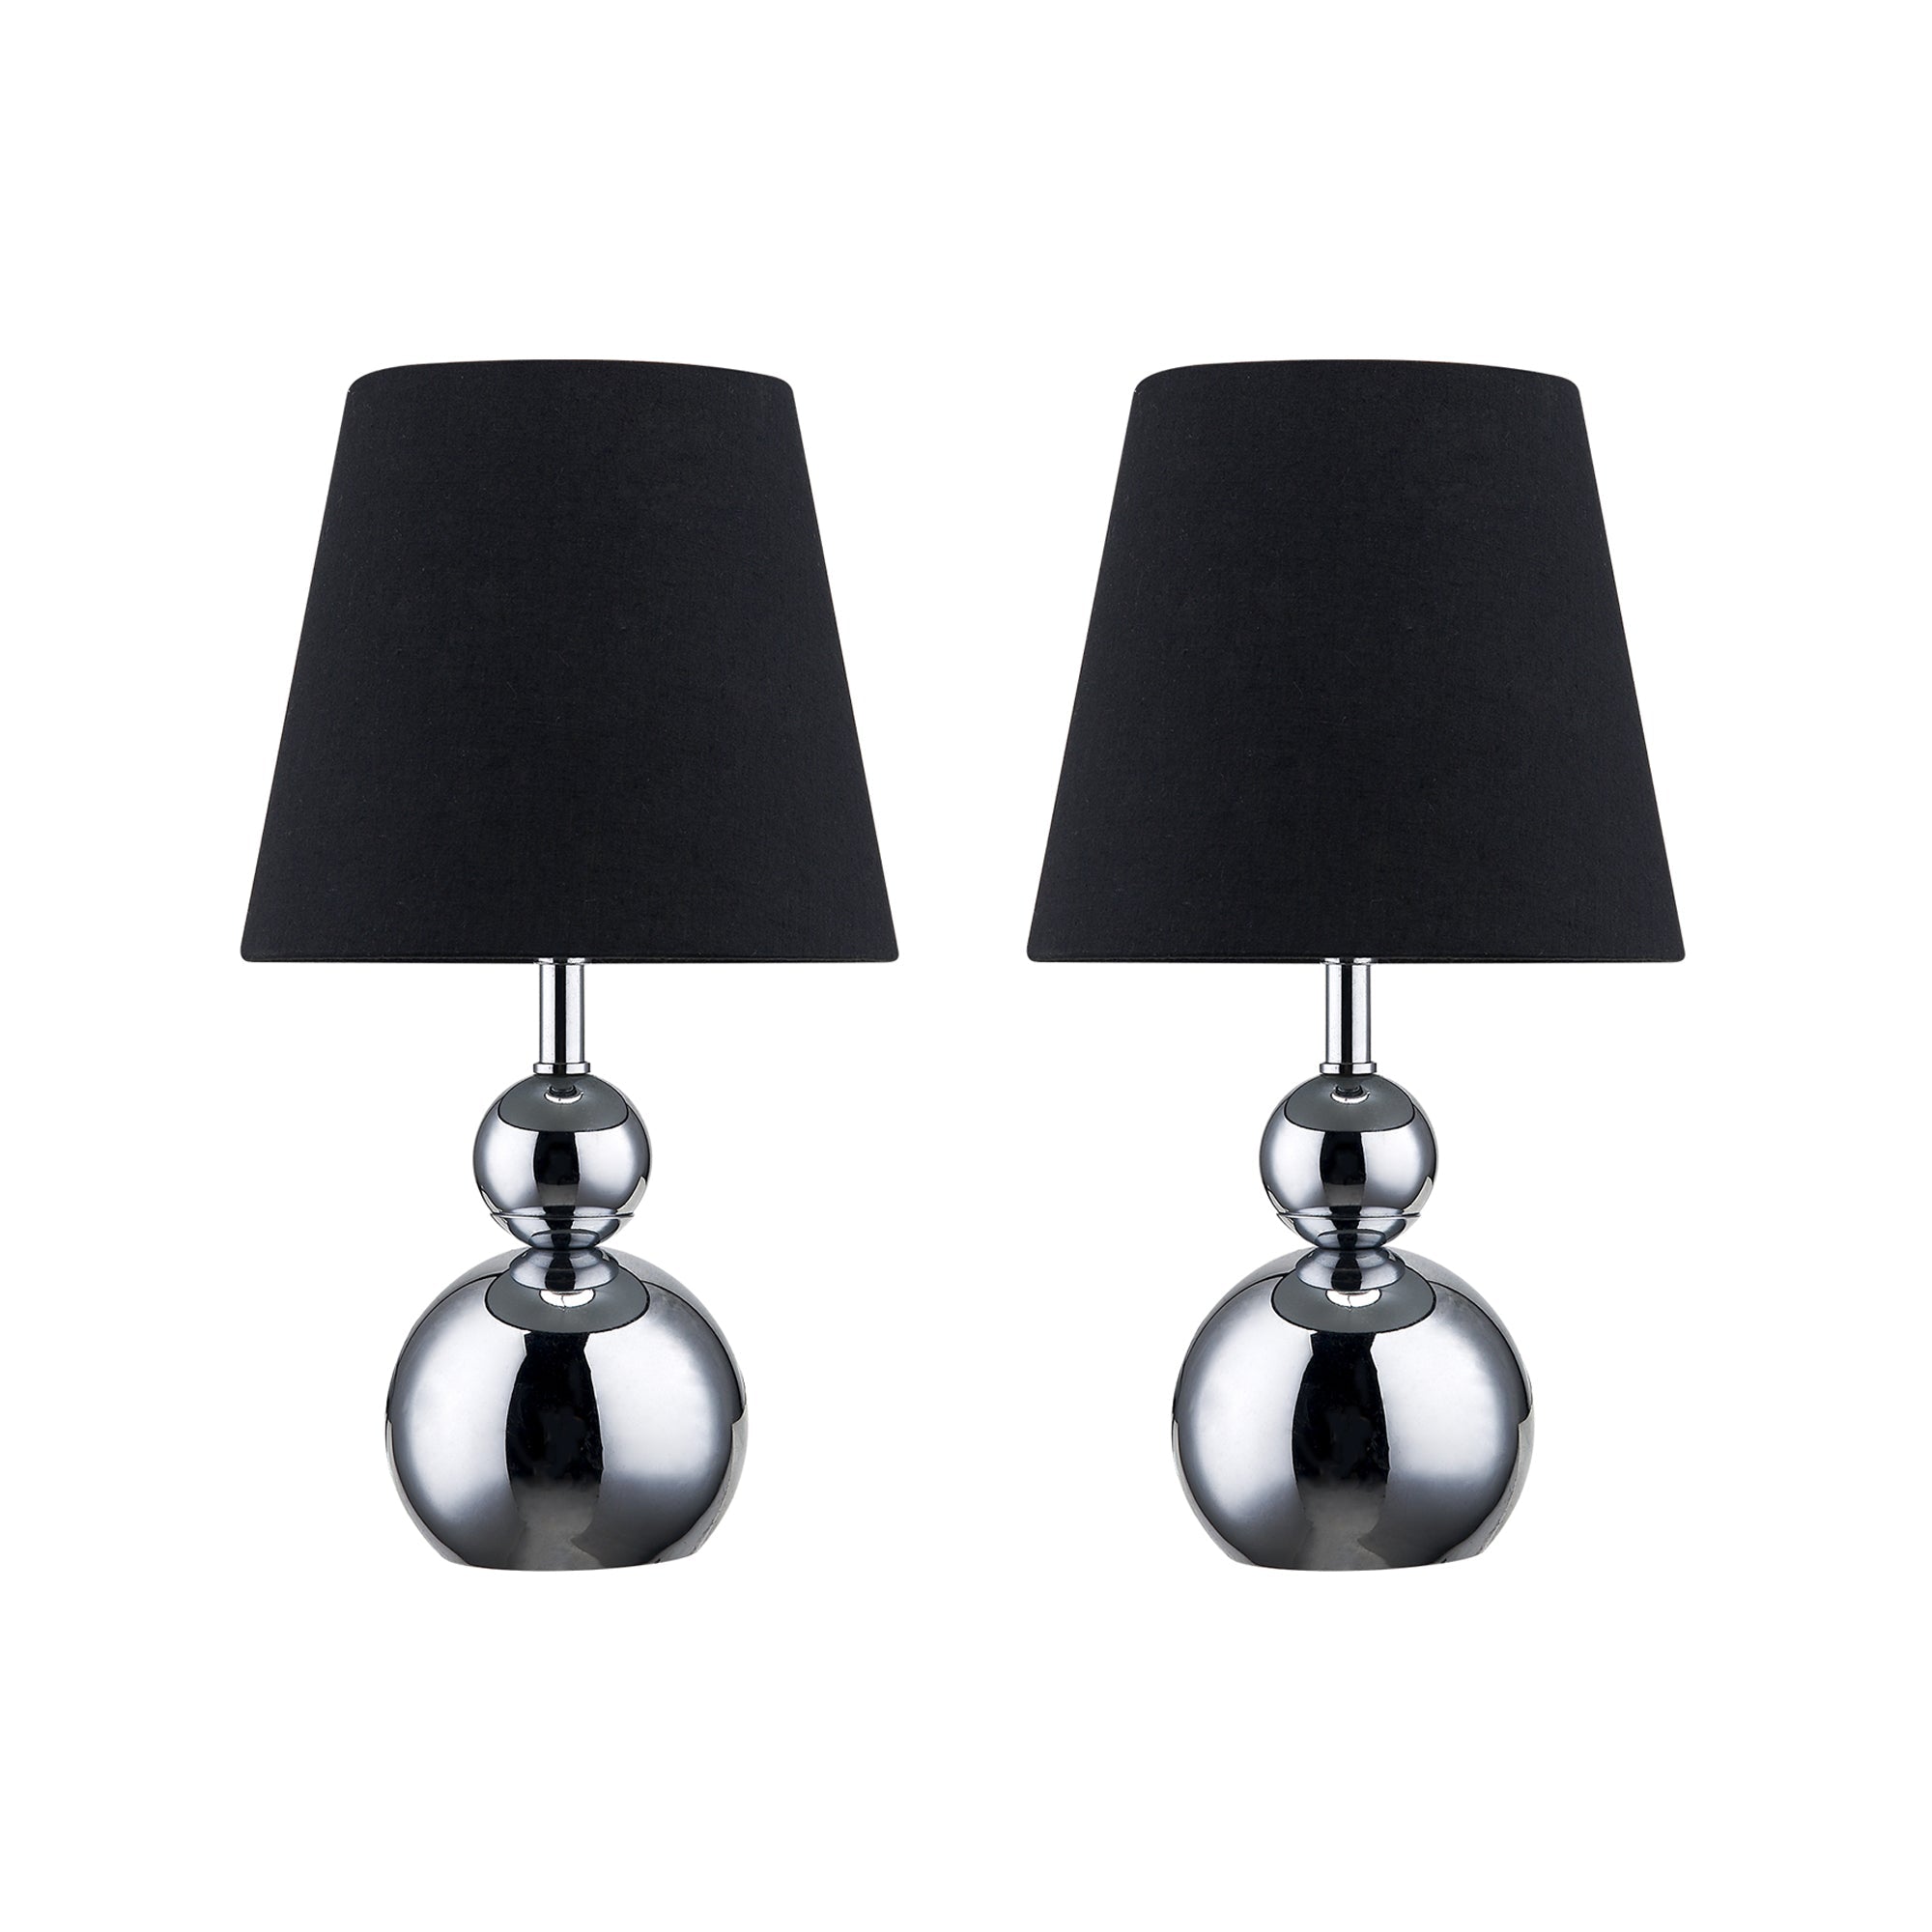 Hulu Touch Table Lamp - Black (Set of 2)